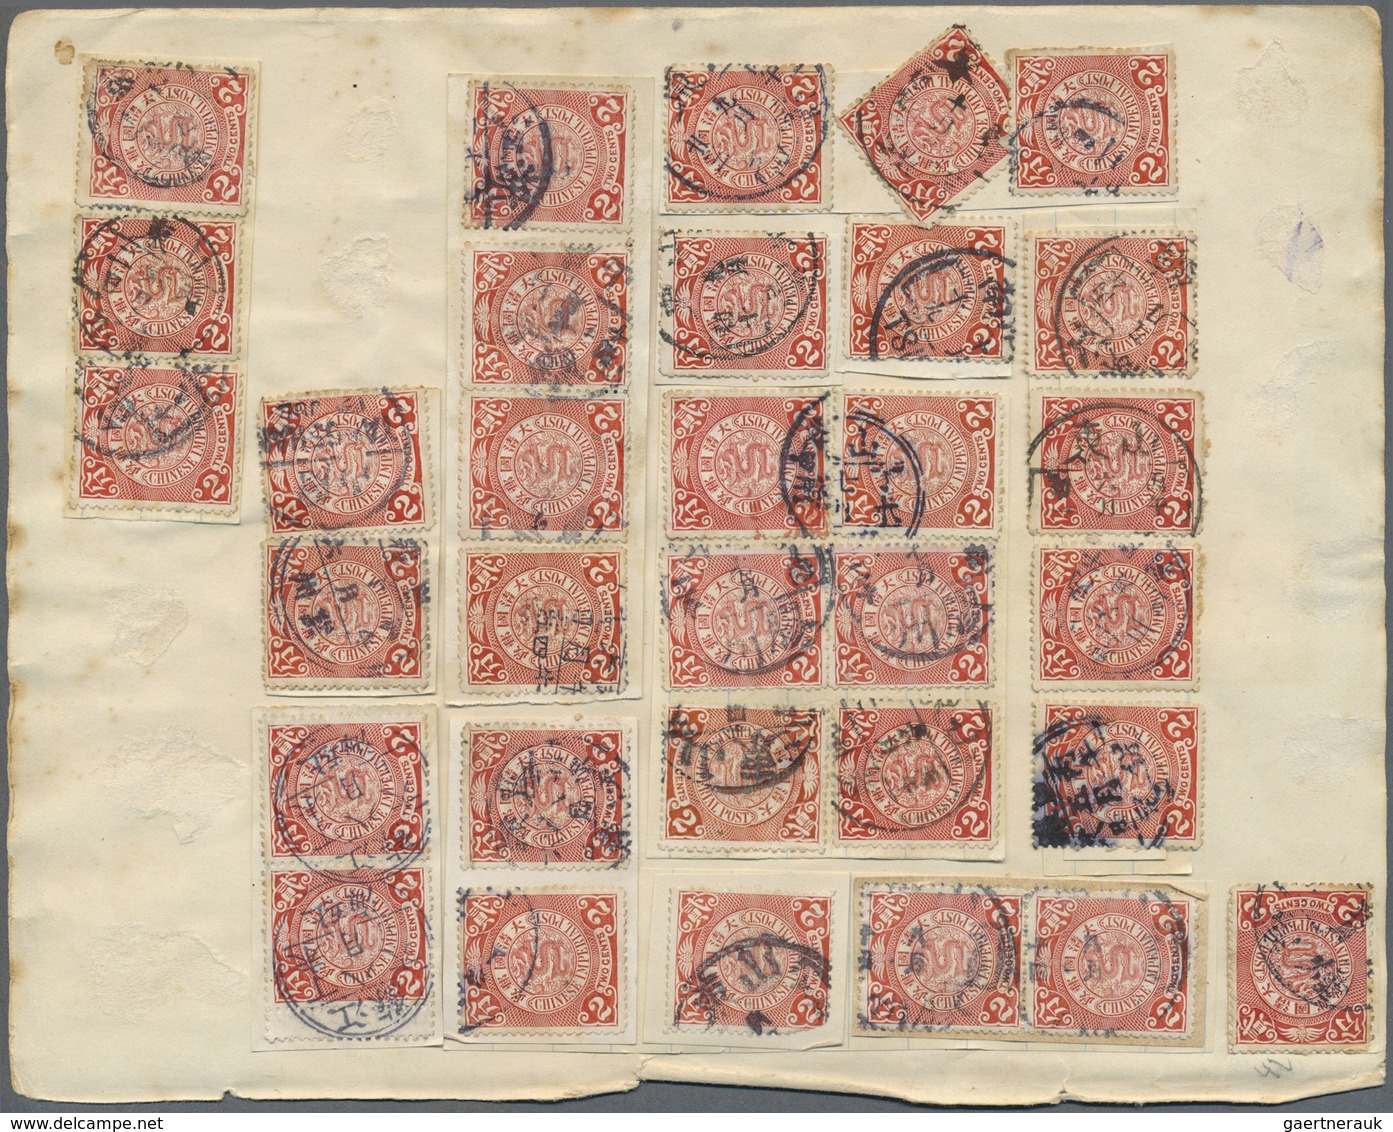 O China: 1898/1930 (ca.), 200+ used, mainly coiling dragons 1 C./4 C. from places in Shantung or Chihl